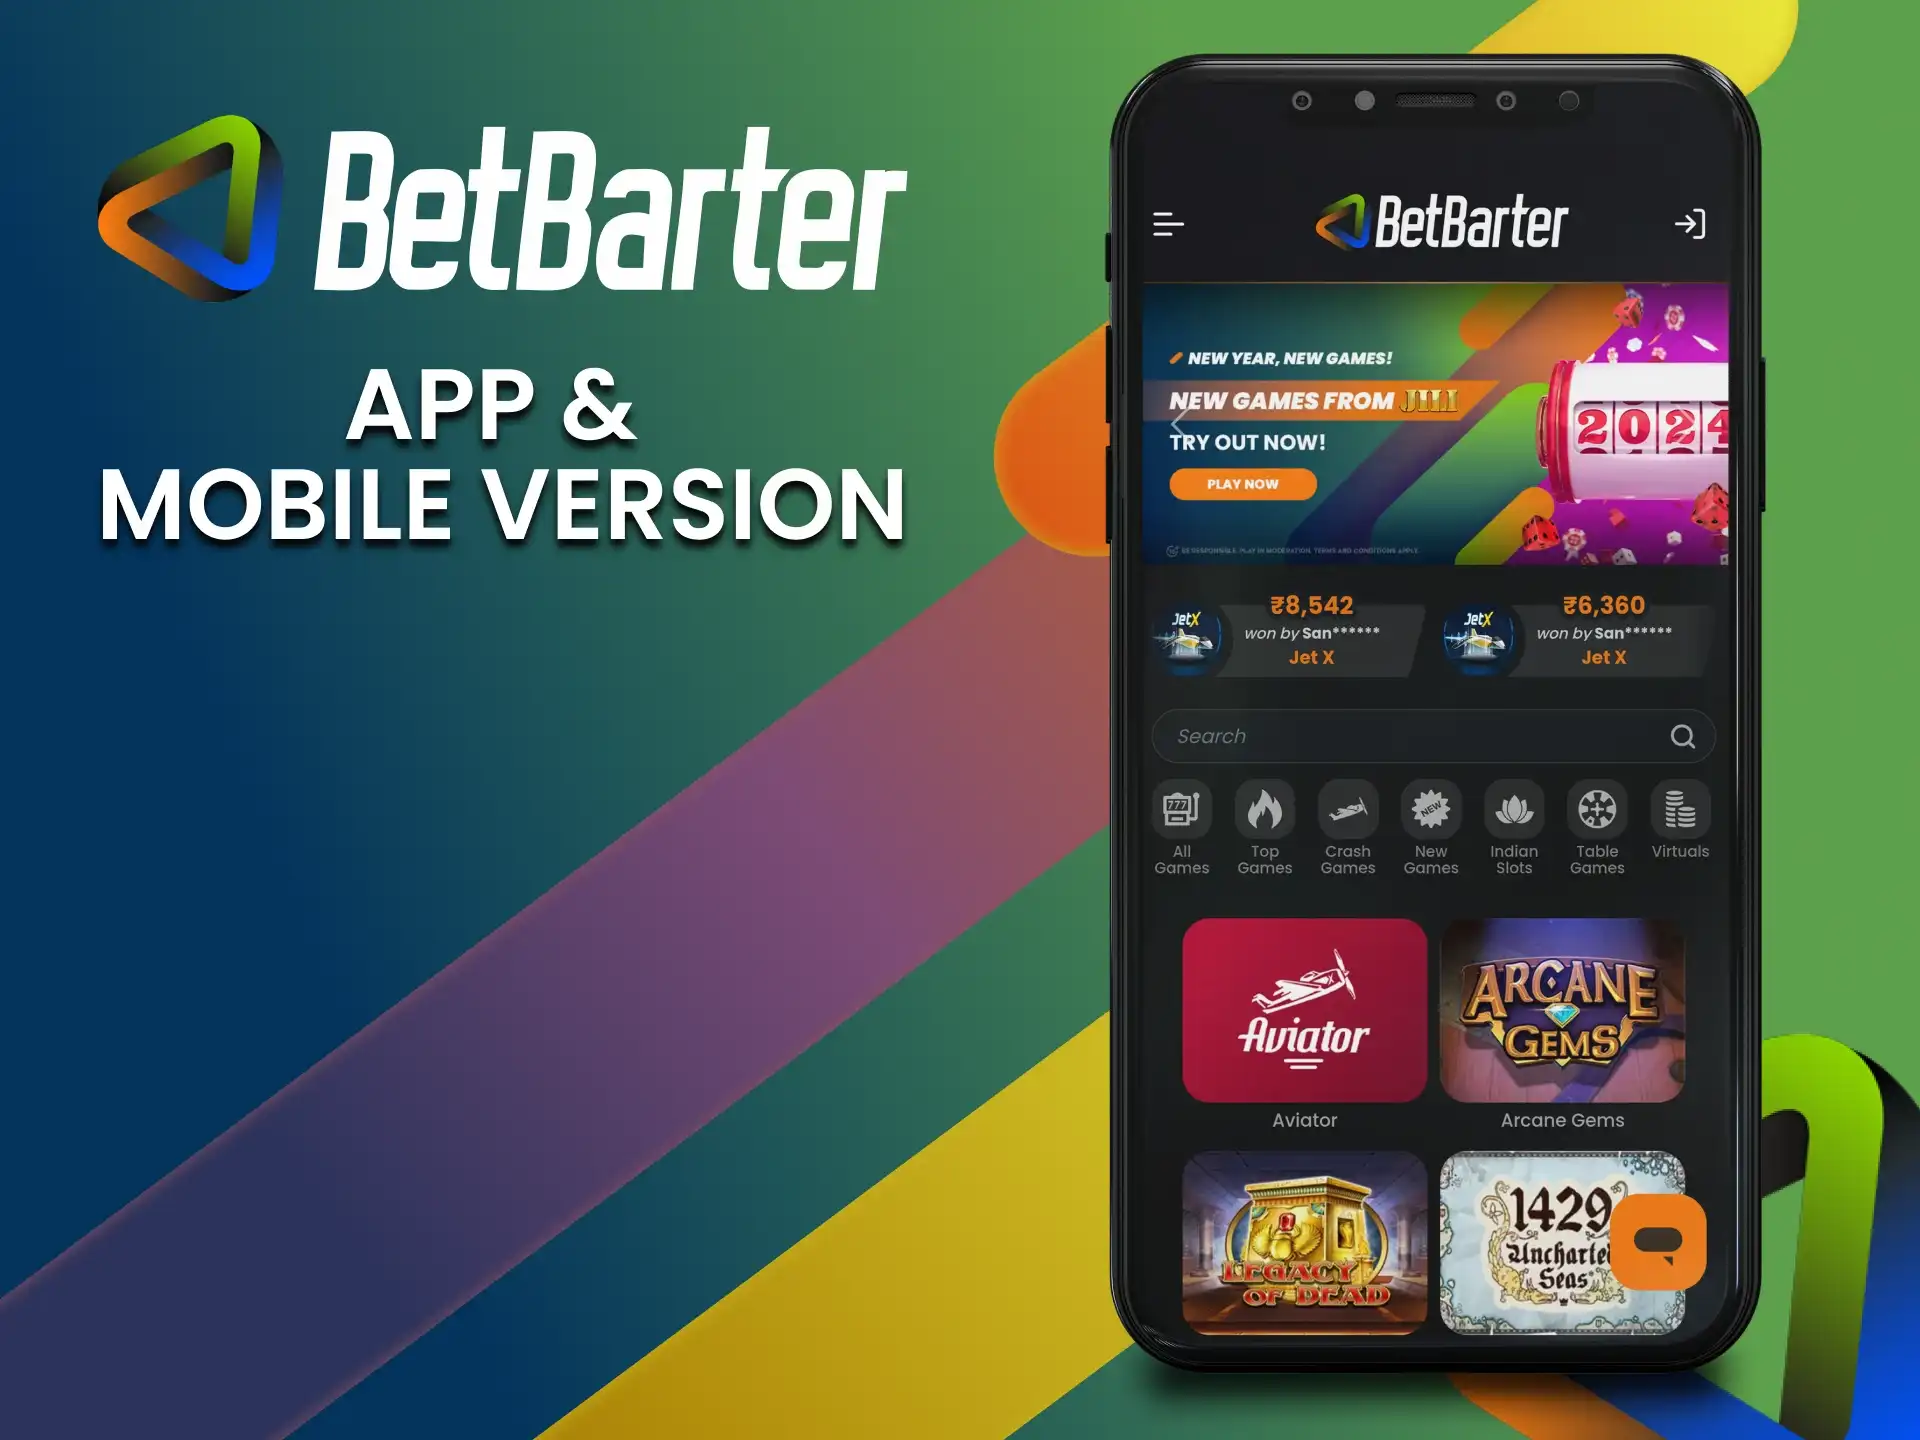 In our article, you can easily understand the difference between the BetBarter app and website.